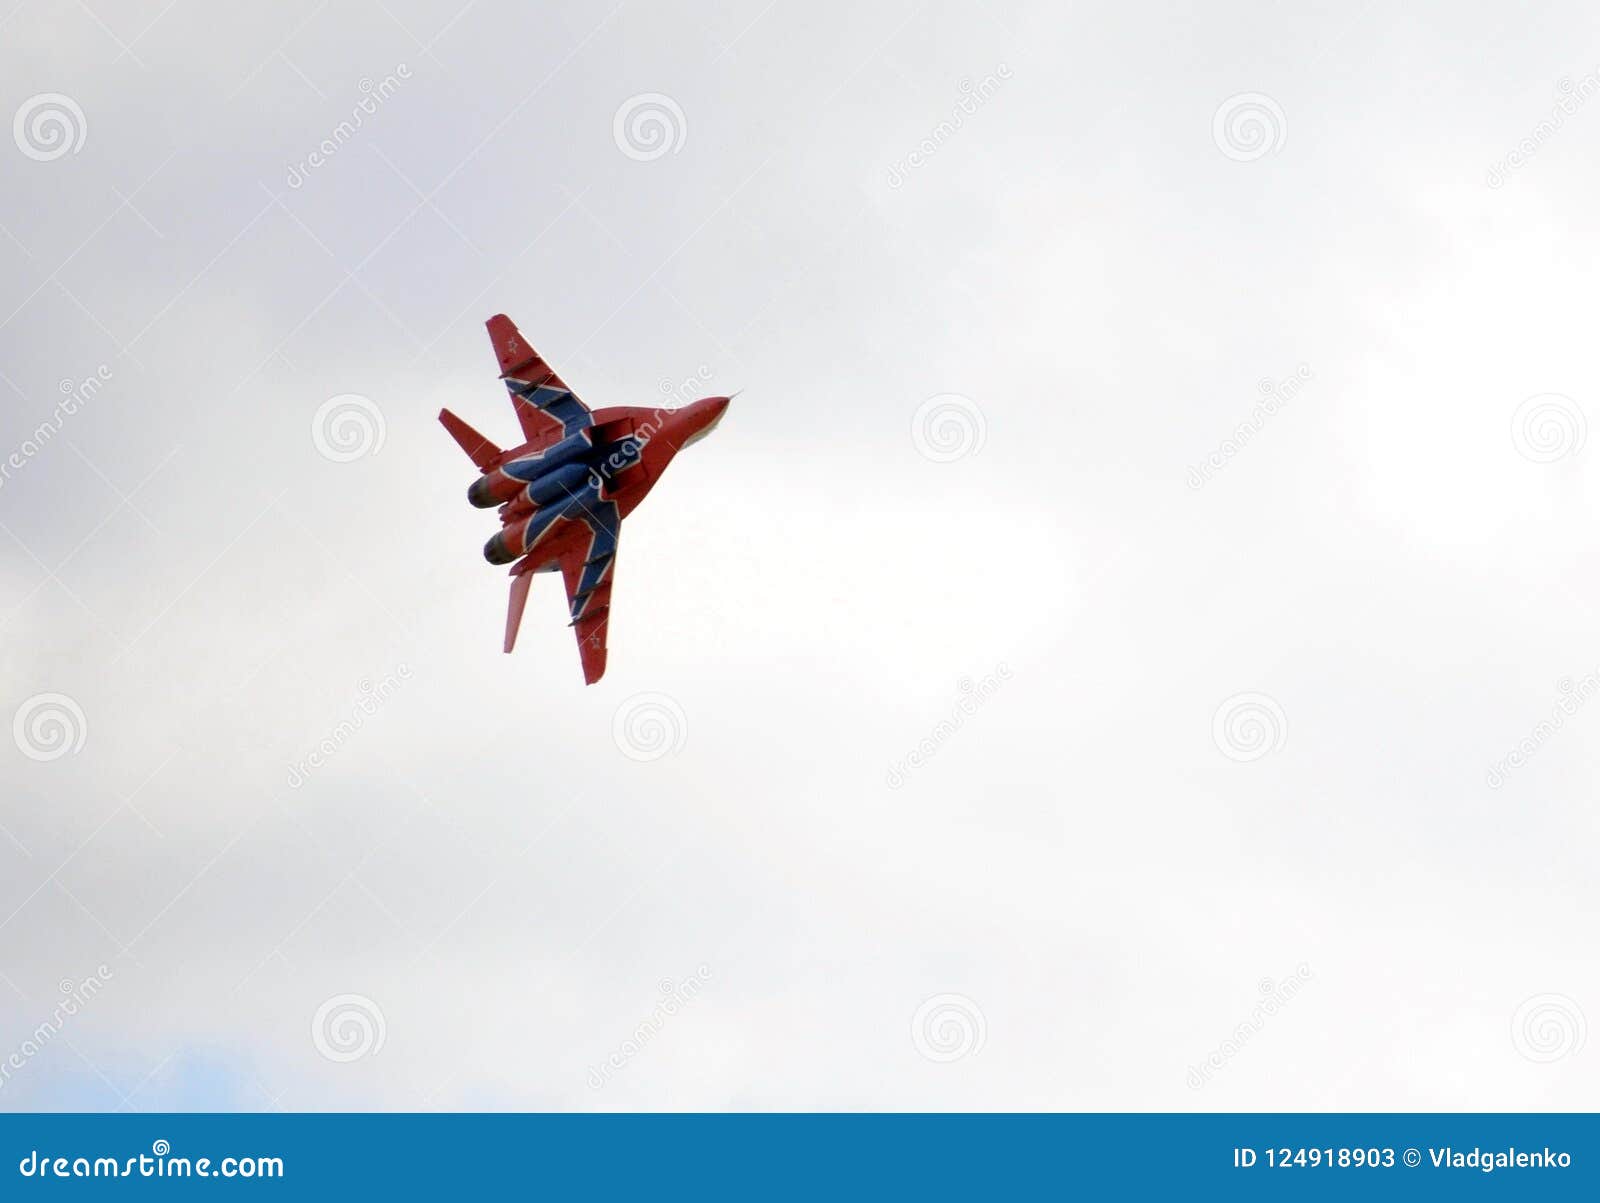 multipurpose highly maneuverable mig-29 fighter from the strizhi aerobatic team over the myachkovo airfield